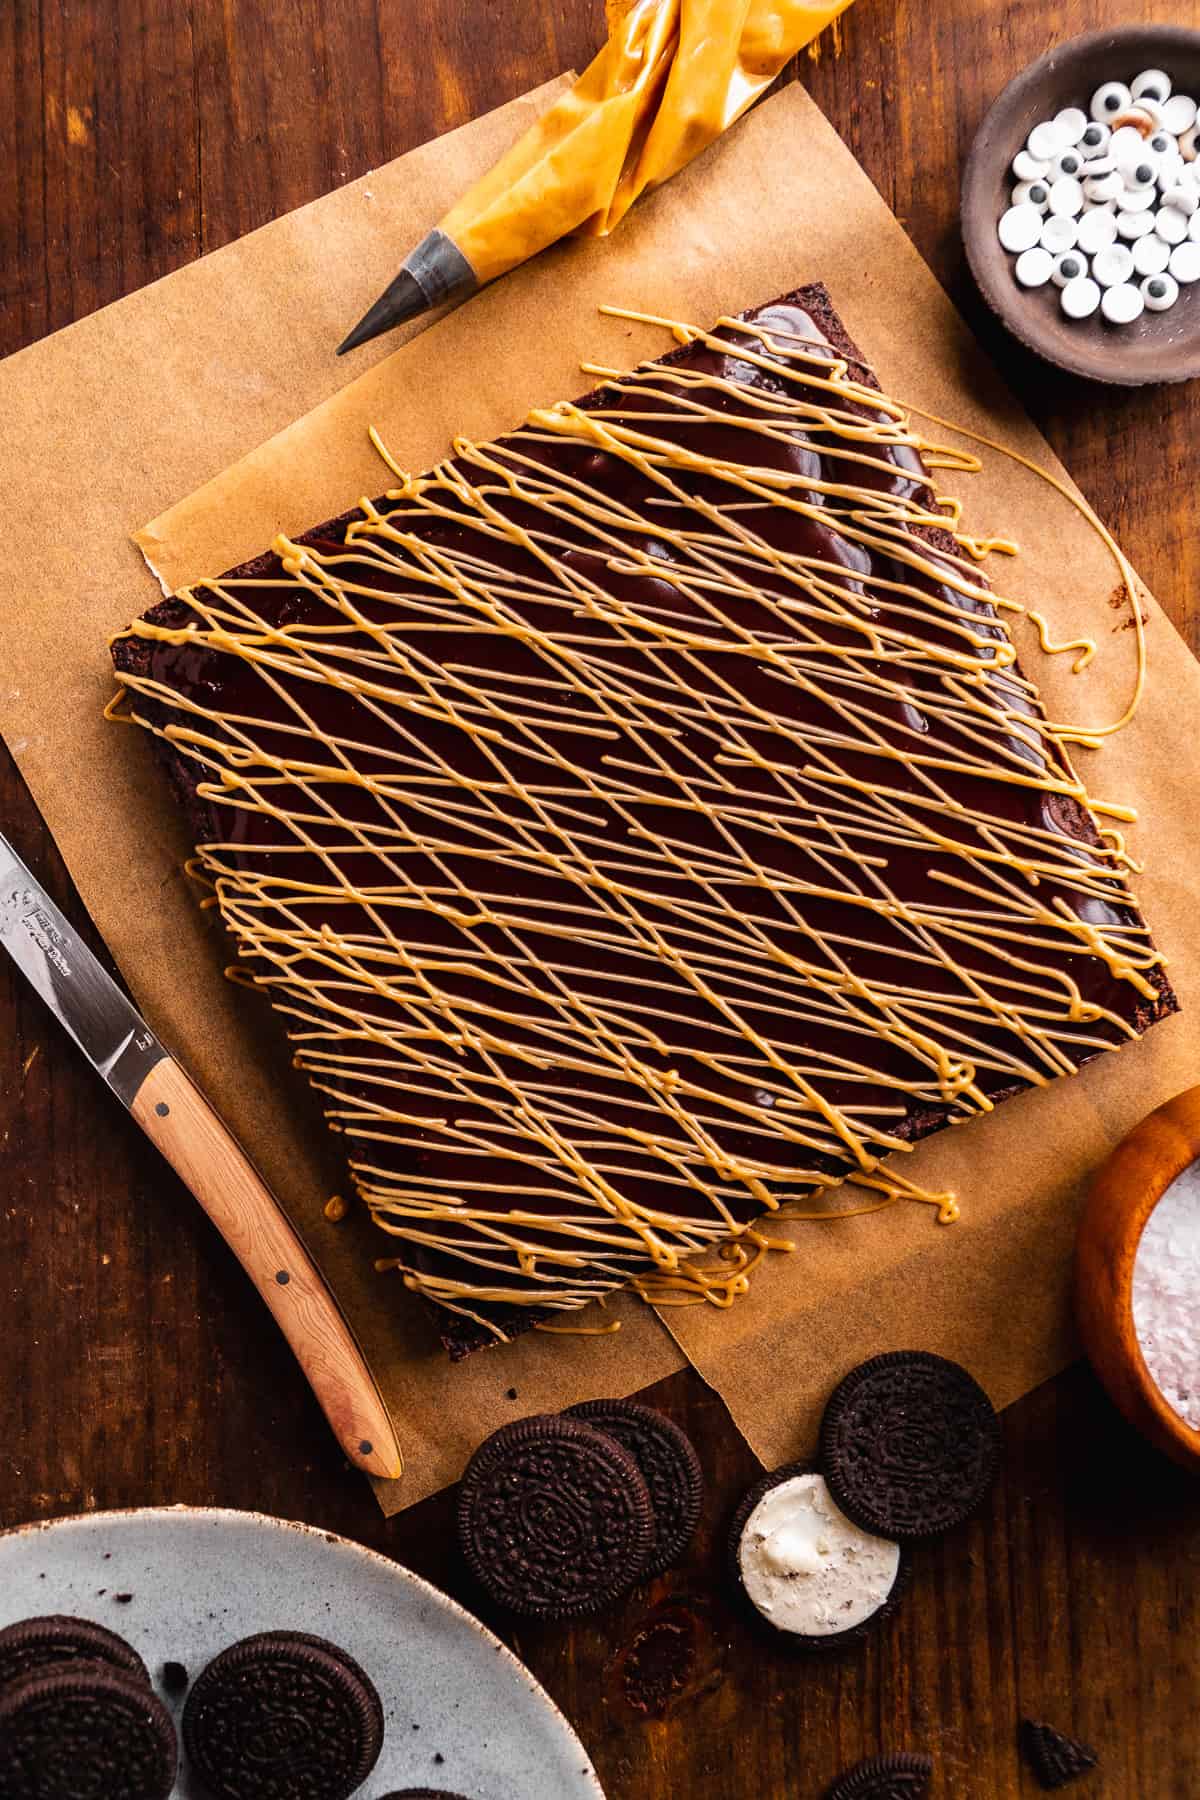 Square brownies with almond butter drizzled over top on a wooden surface.